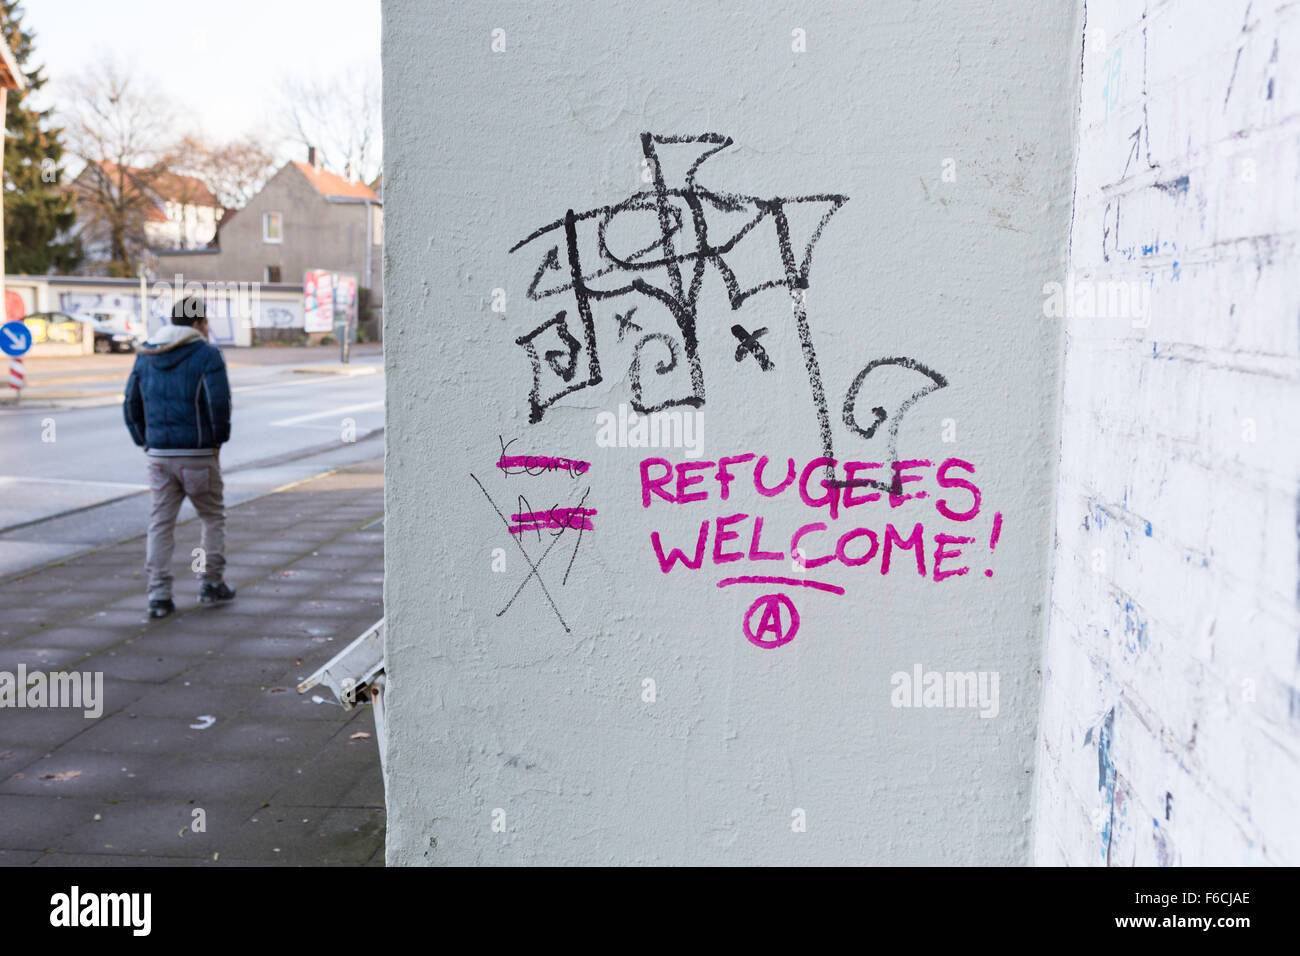 Graffiti saying 'Refugees Welcome' written on a wall in Bielefeld, Germany Stock Photo